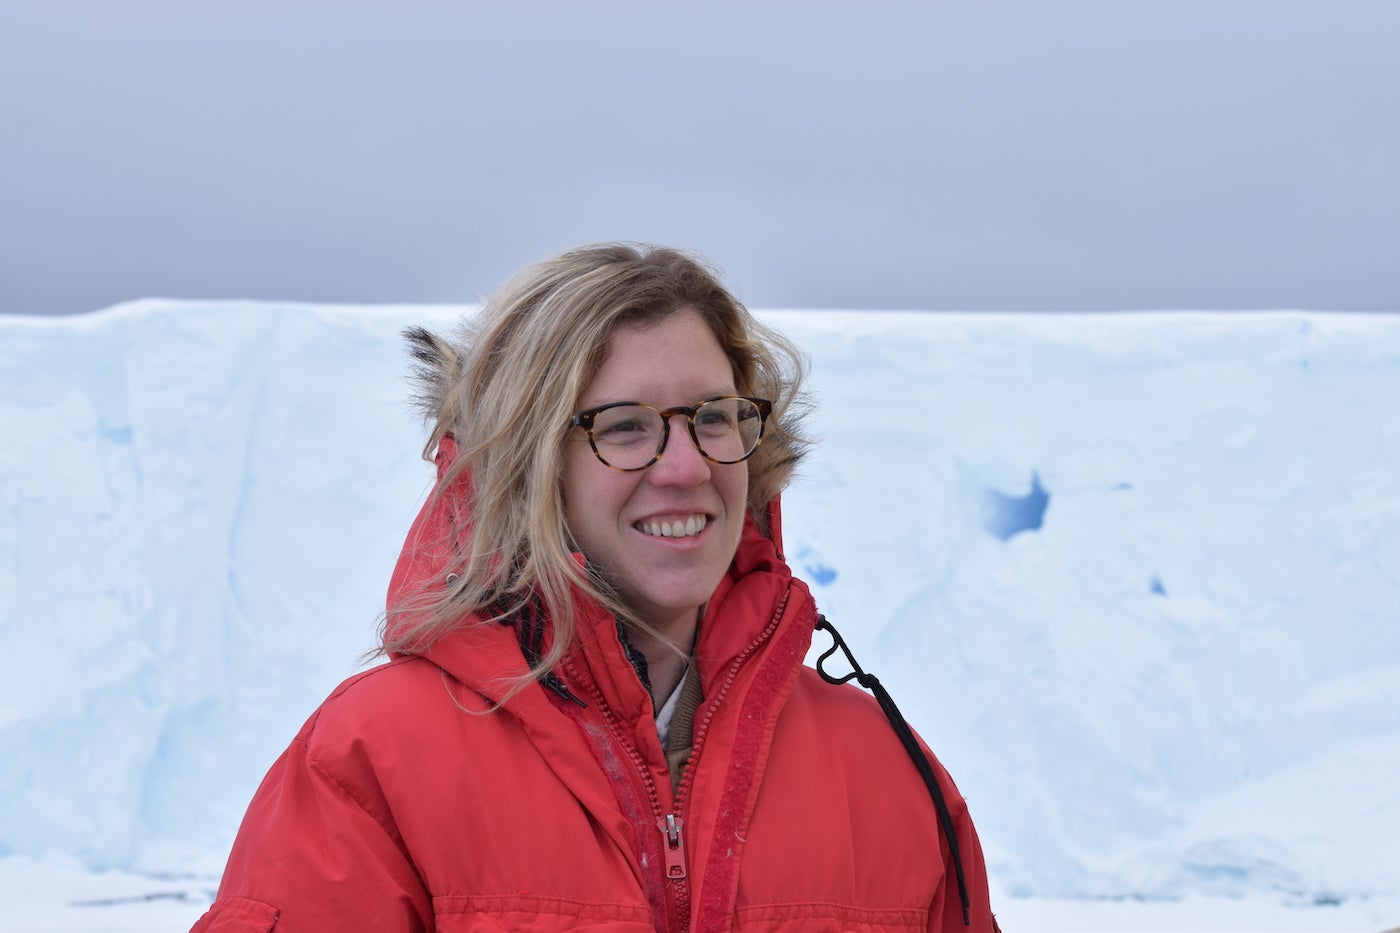 Headshot of Olivia Ahern, she is wearing glasses and a red winter jacket outside with Antarctice ice and an overcast sky in the background.